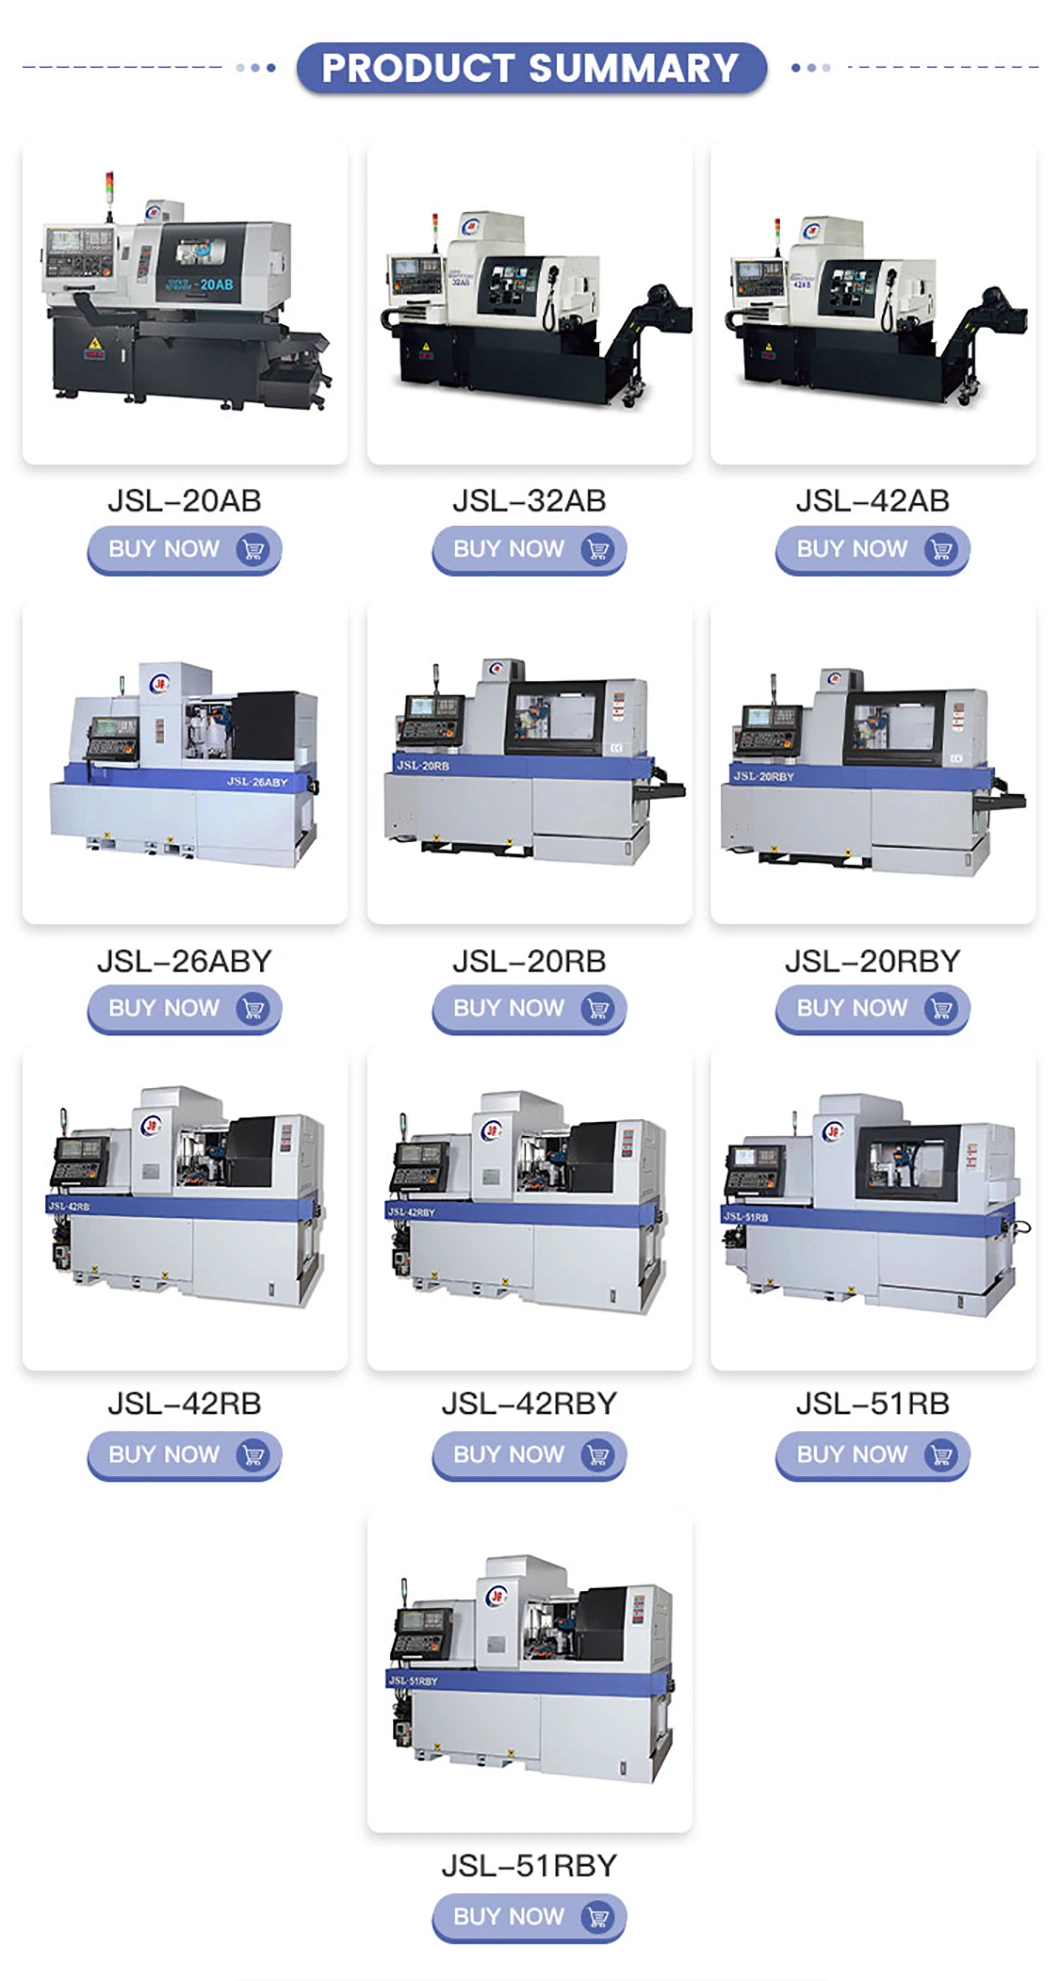 Light Duty High Speed 7 Axis CNC Swiss Automatic Lathe Machine for High-Precision Processing (JSL-20AB)